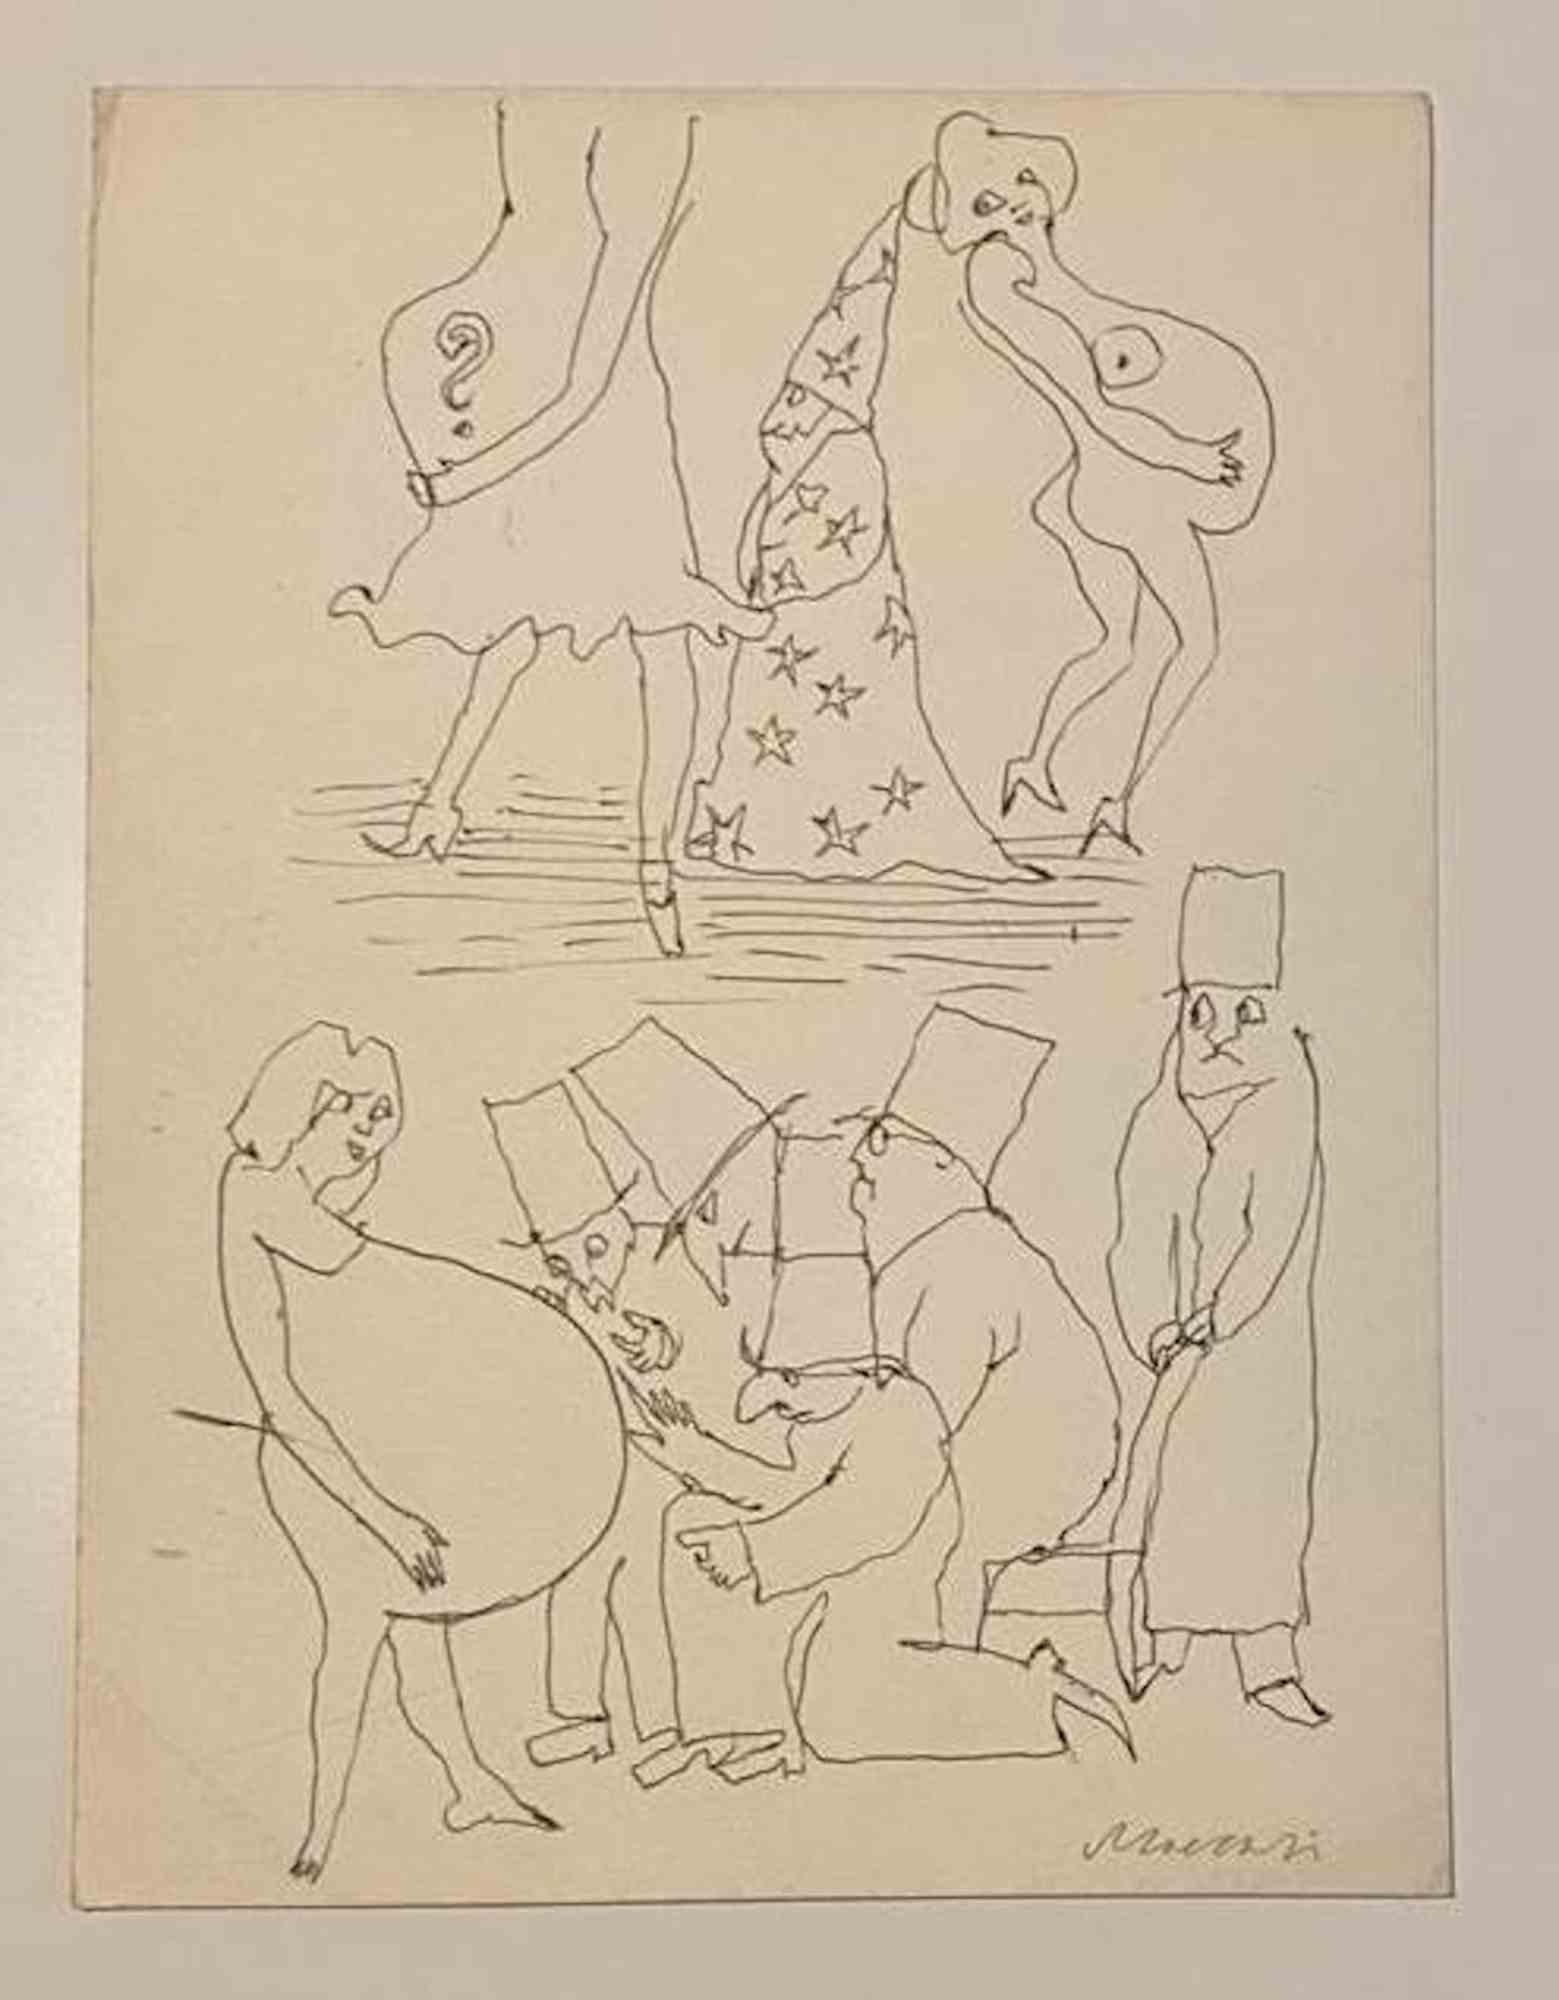 The Magician  is a pen Drawing realized by Mino Maccari  (1924-1989) in the Mid-20th Century.

Hand-signed on the lower.

Good conditions.

Mino Maccari (Siena, 1924-Rome, June 16, 1989) was an Italian writer, painter, engraver and journalist,